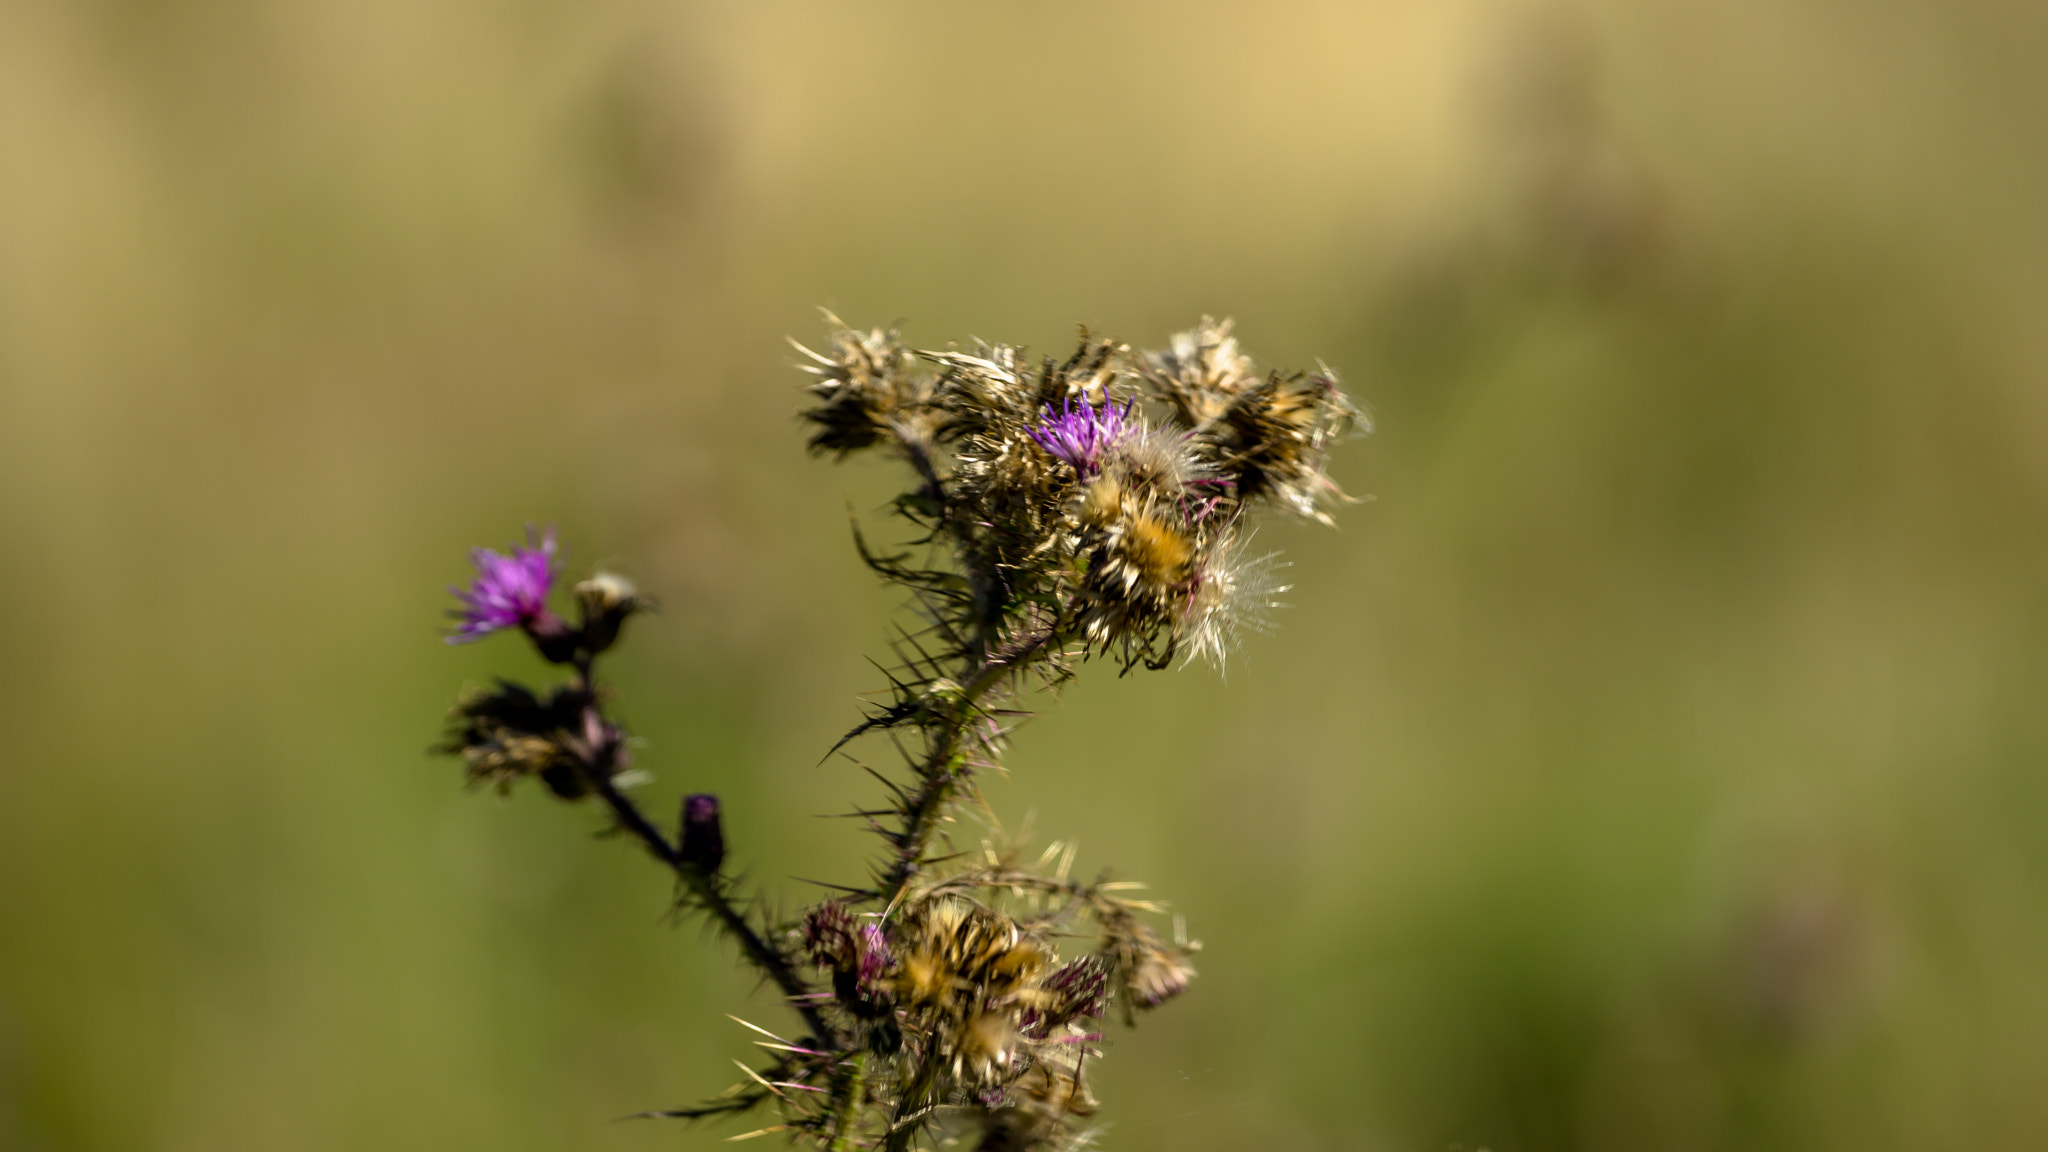 Sony a6000 + Tamron 18-270mm F3.5-6.3 Di II PZD sample photo. On the meadow photography